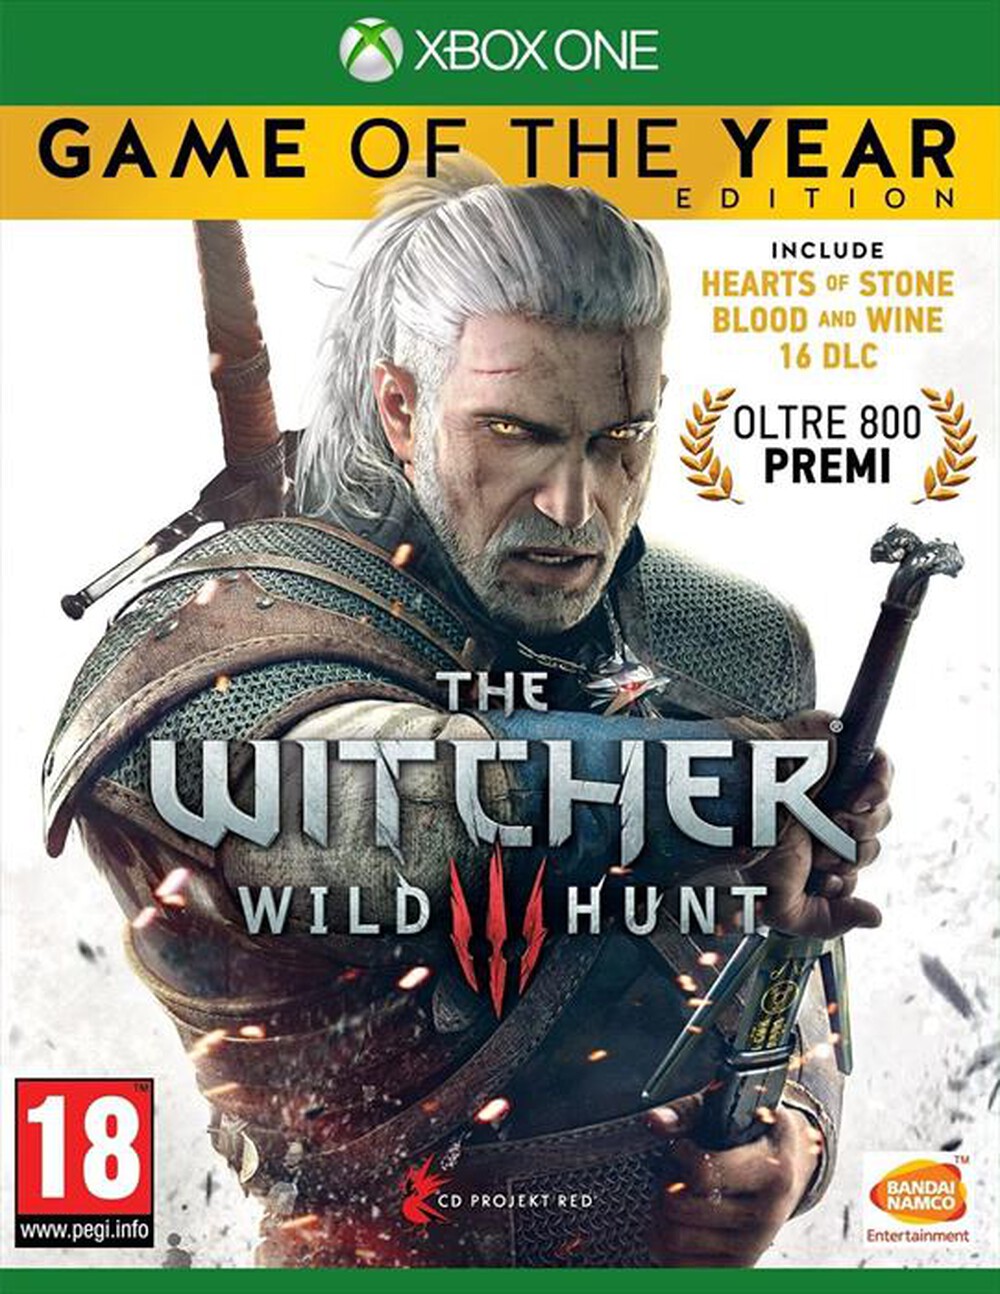 "NAMCO - The Witcher 3: The Wild Hunt GOTY EDITION Xbox One"